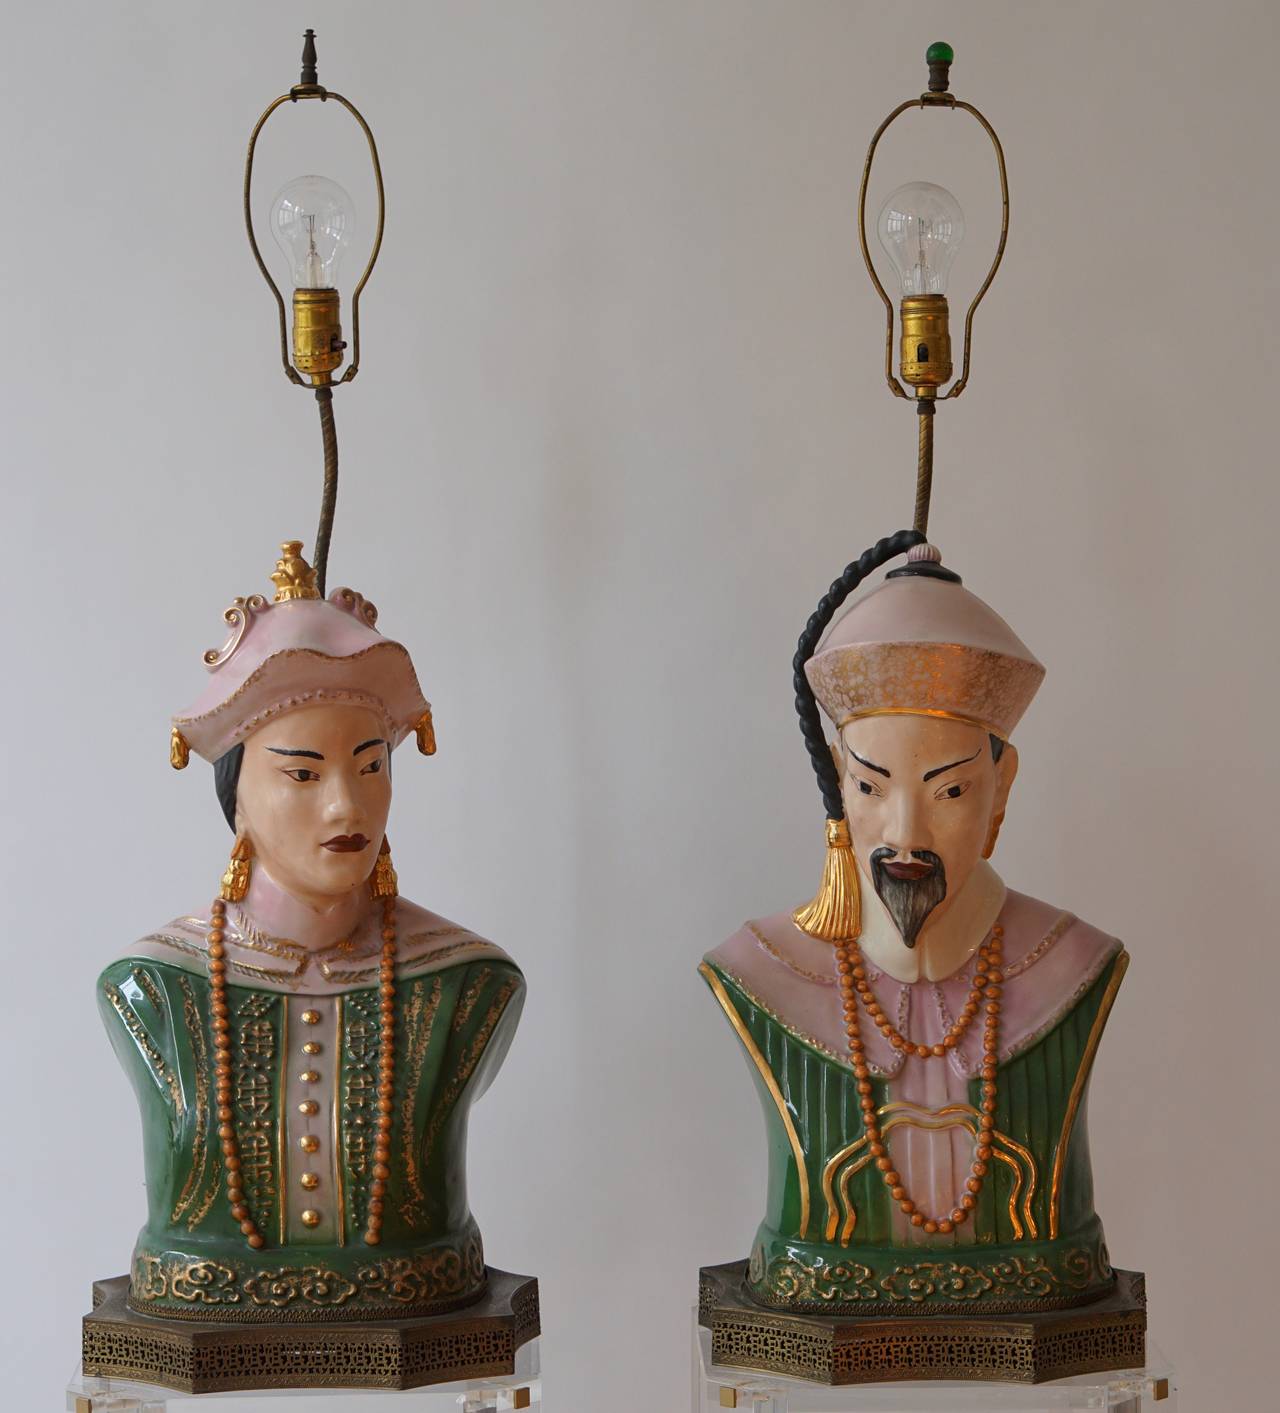 A pair of Italian decorative figures, representing a chinaman and woman on a canted and open worked iron stand.
Adapted as lamps and for electricity. 
First half 20th century.
Dimensions: Total height: 88 cm.